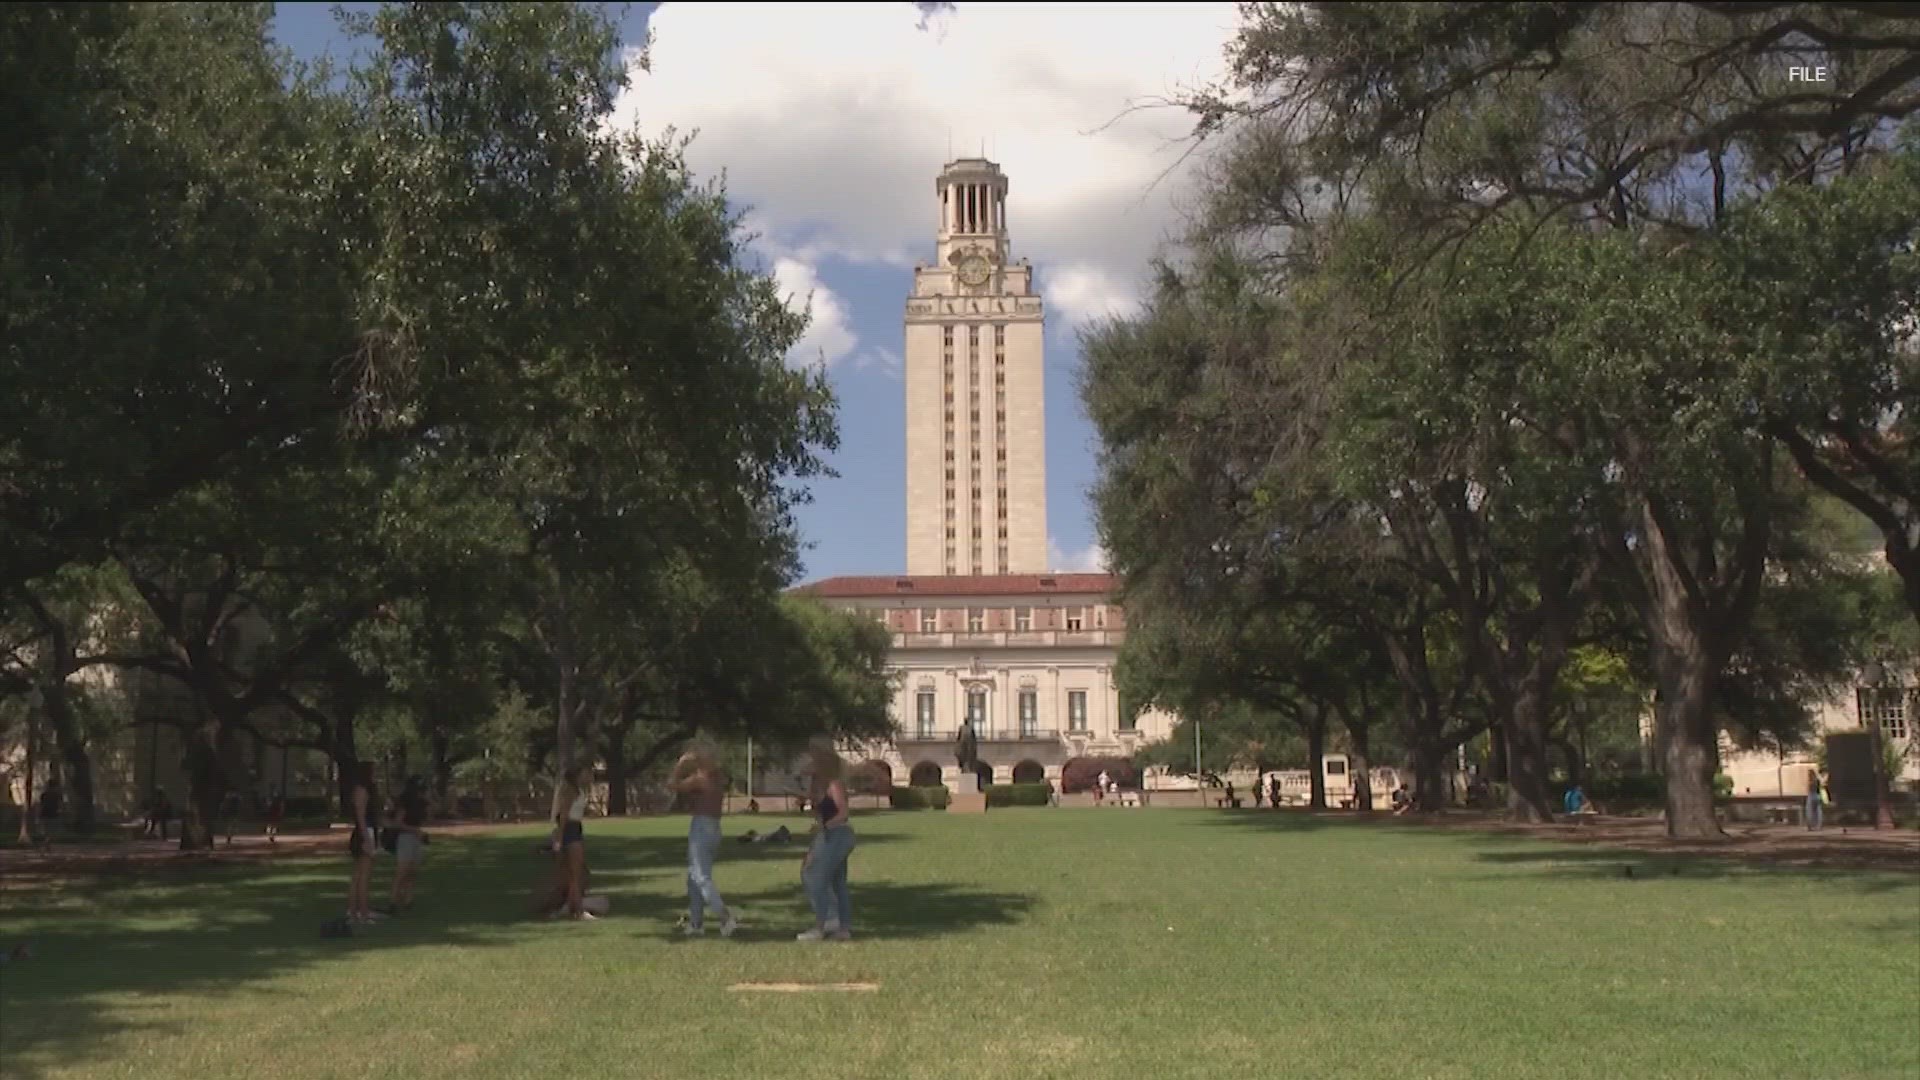 Critics of SB 18 say eliminating tenure would make it harder for universities to hire professors.